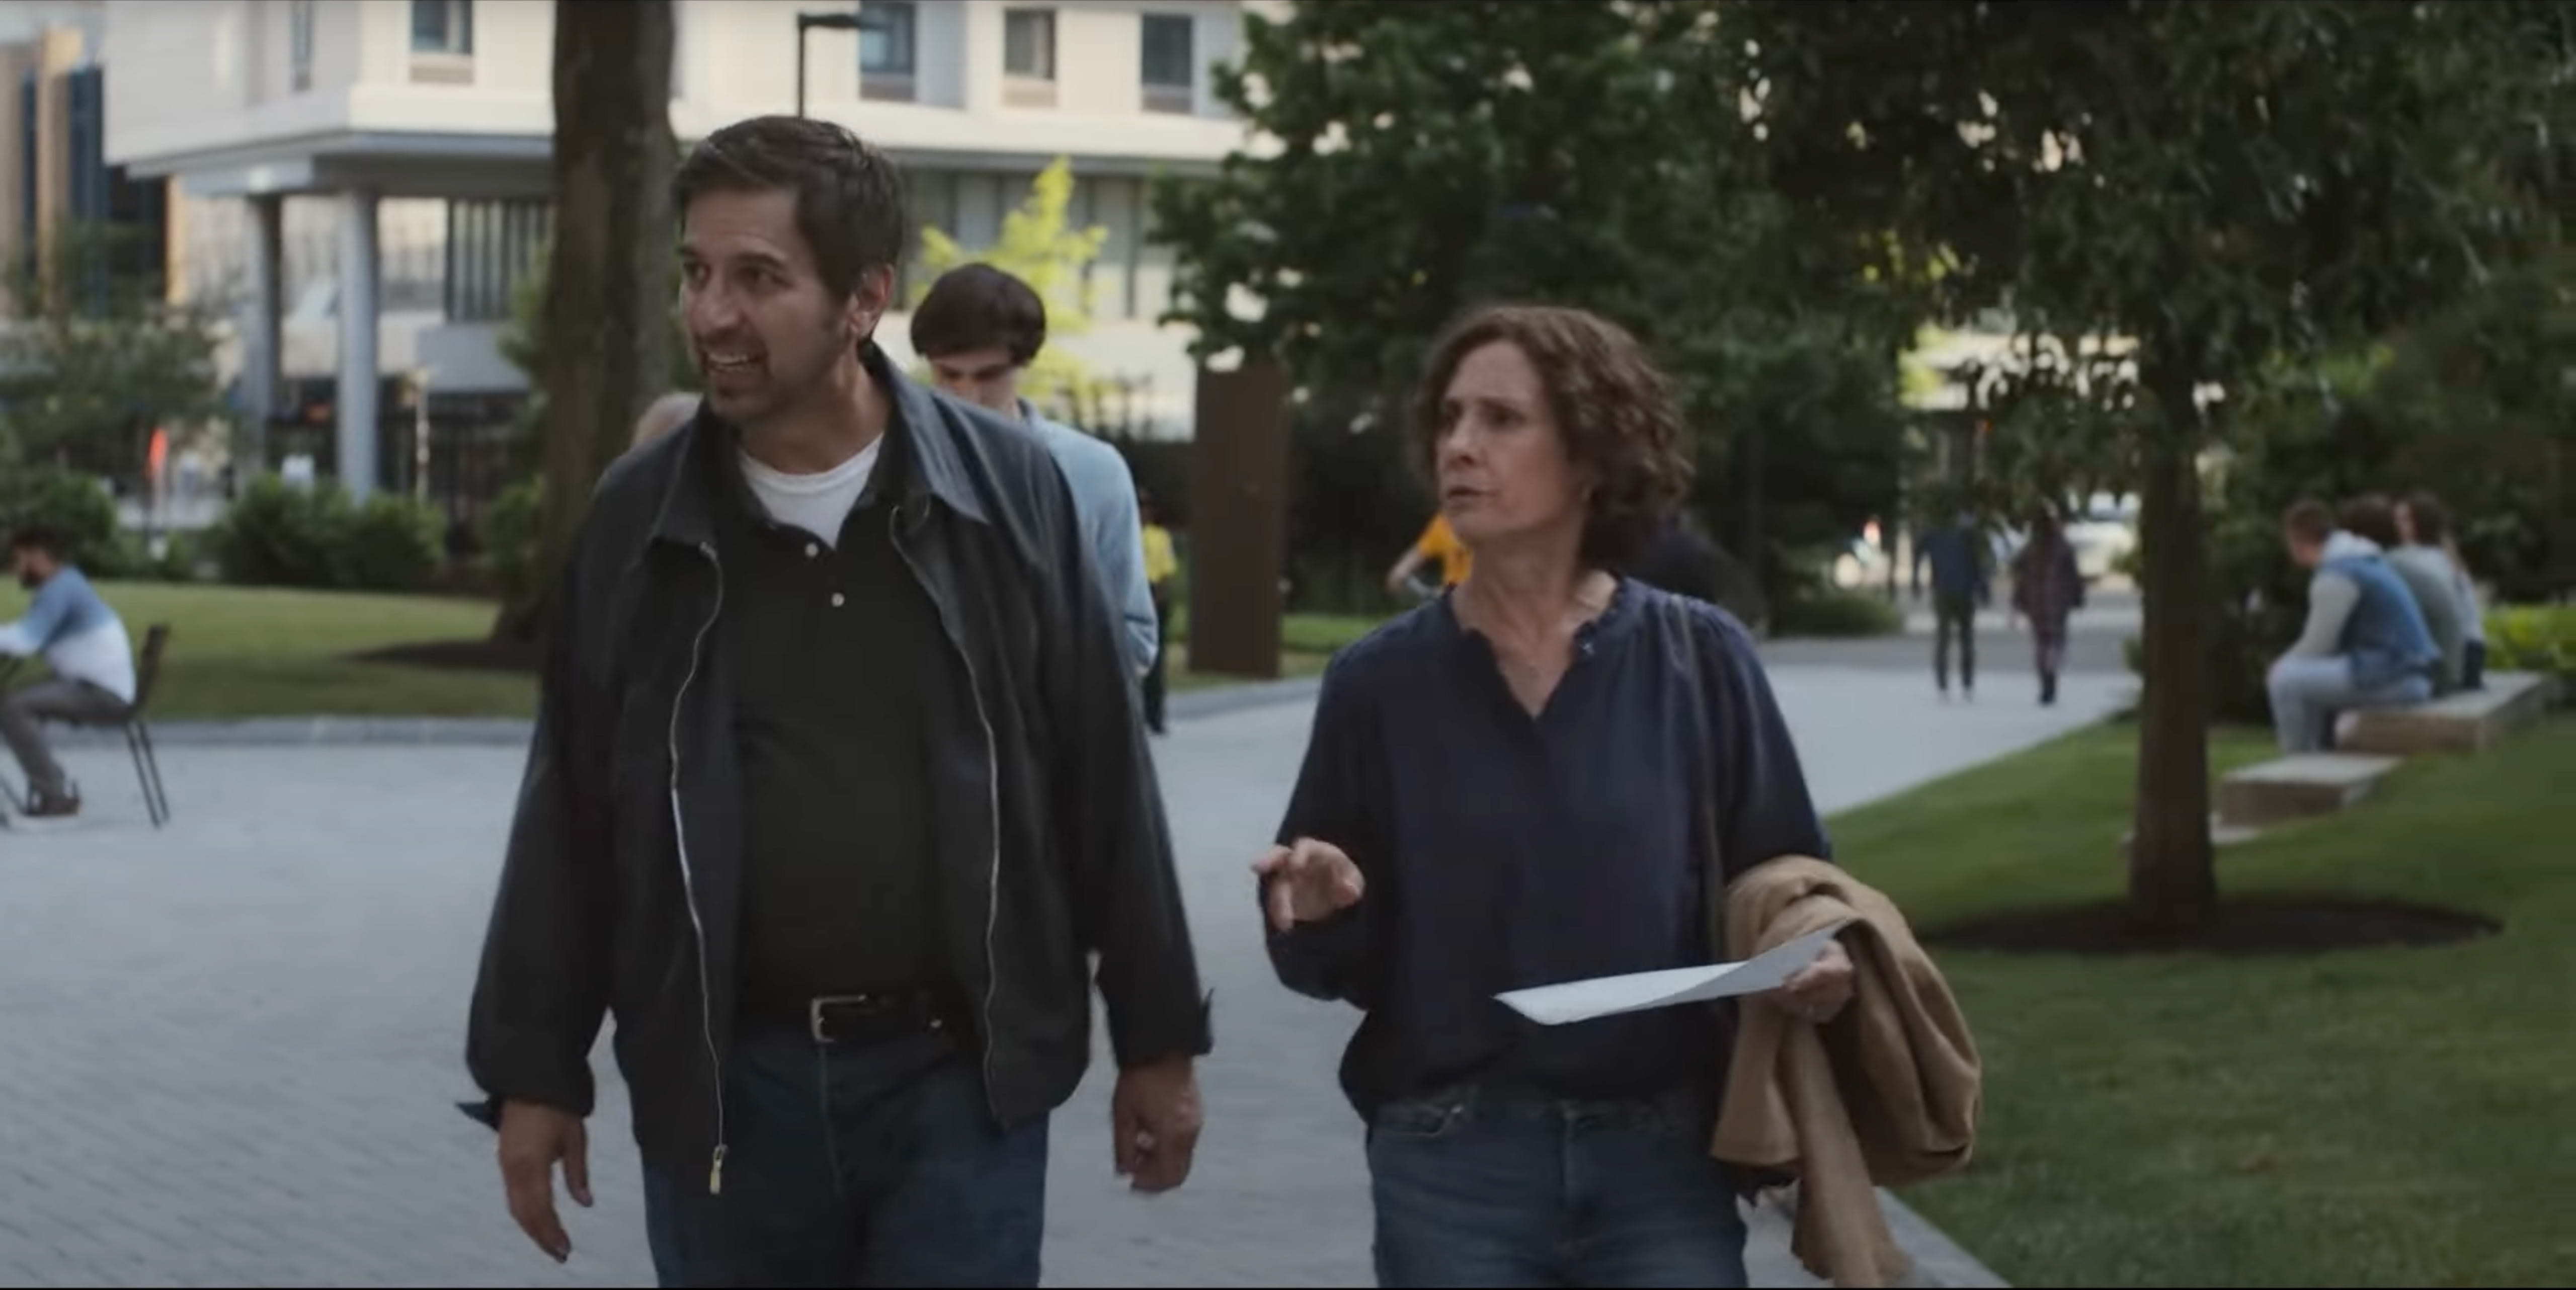 Drexel's  Korman Family Quad and Chestnut Square can be seen in the trailer alongside Ray Romano, Laurie Metcalf and Jacob Ward. Screenshot from the trailer to “Somewhere in Queens.” Directed by Ray Romano. Roadside Attractions, Lionsgate Films. 2023.